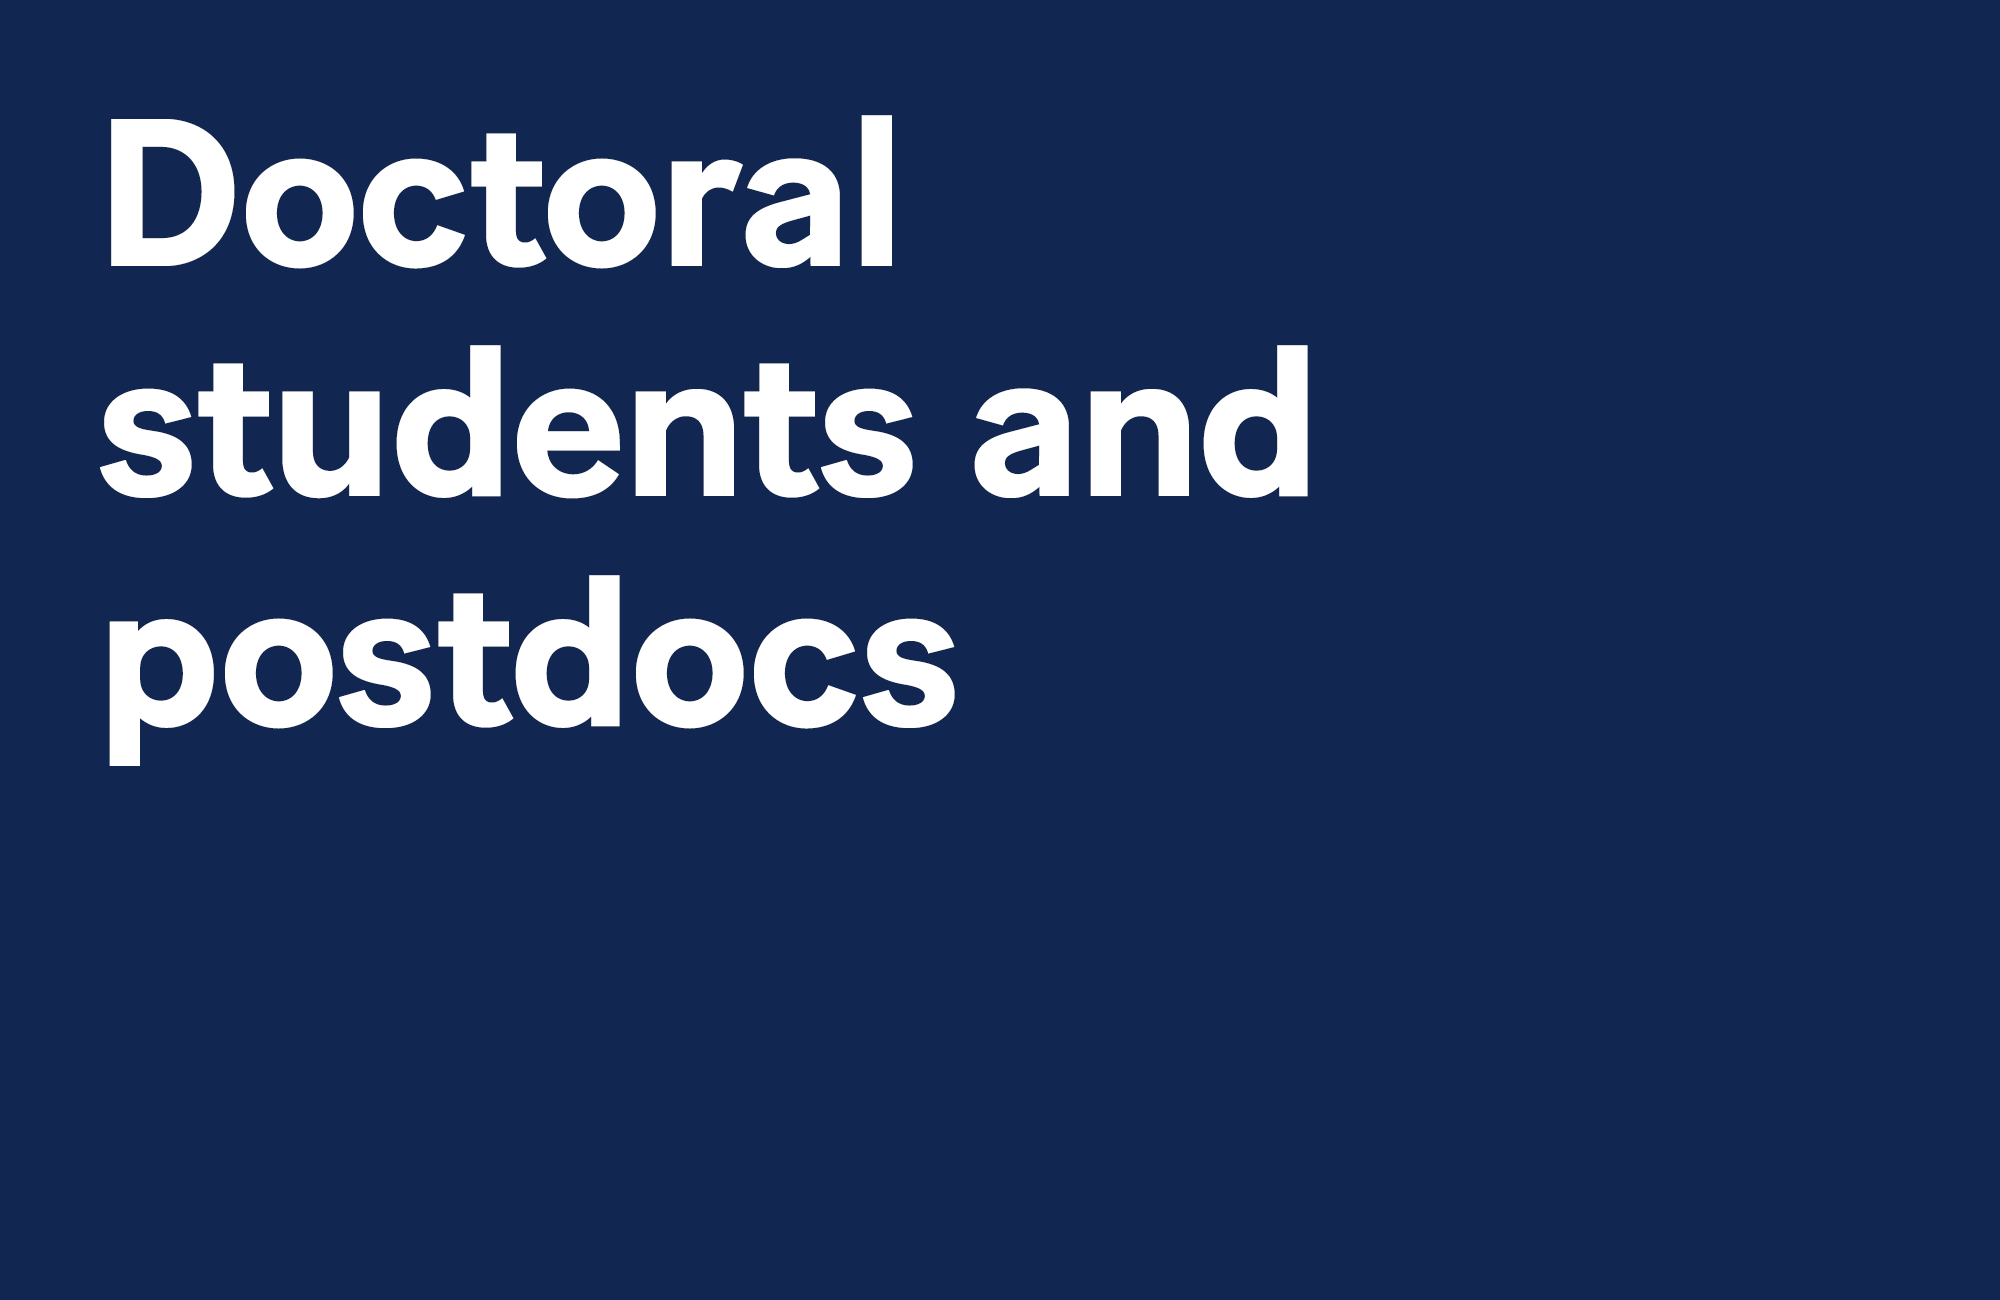 Doctoral students and postdocs